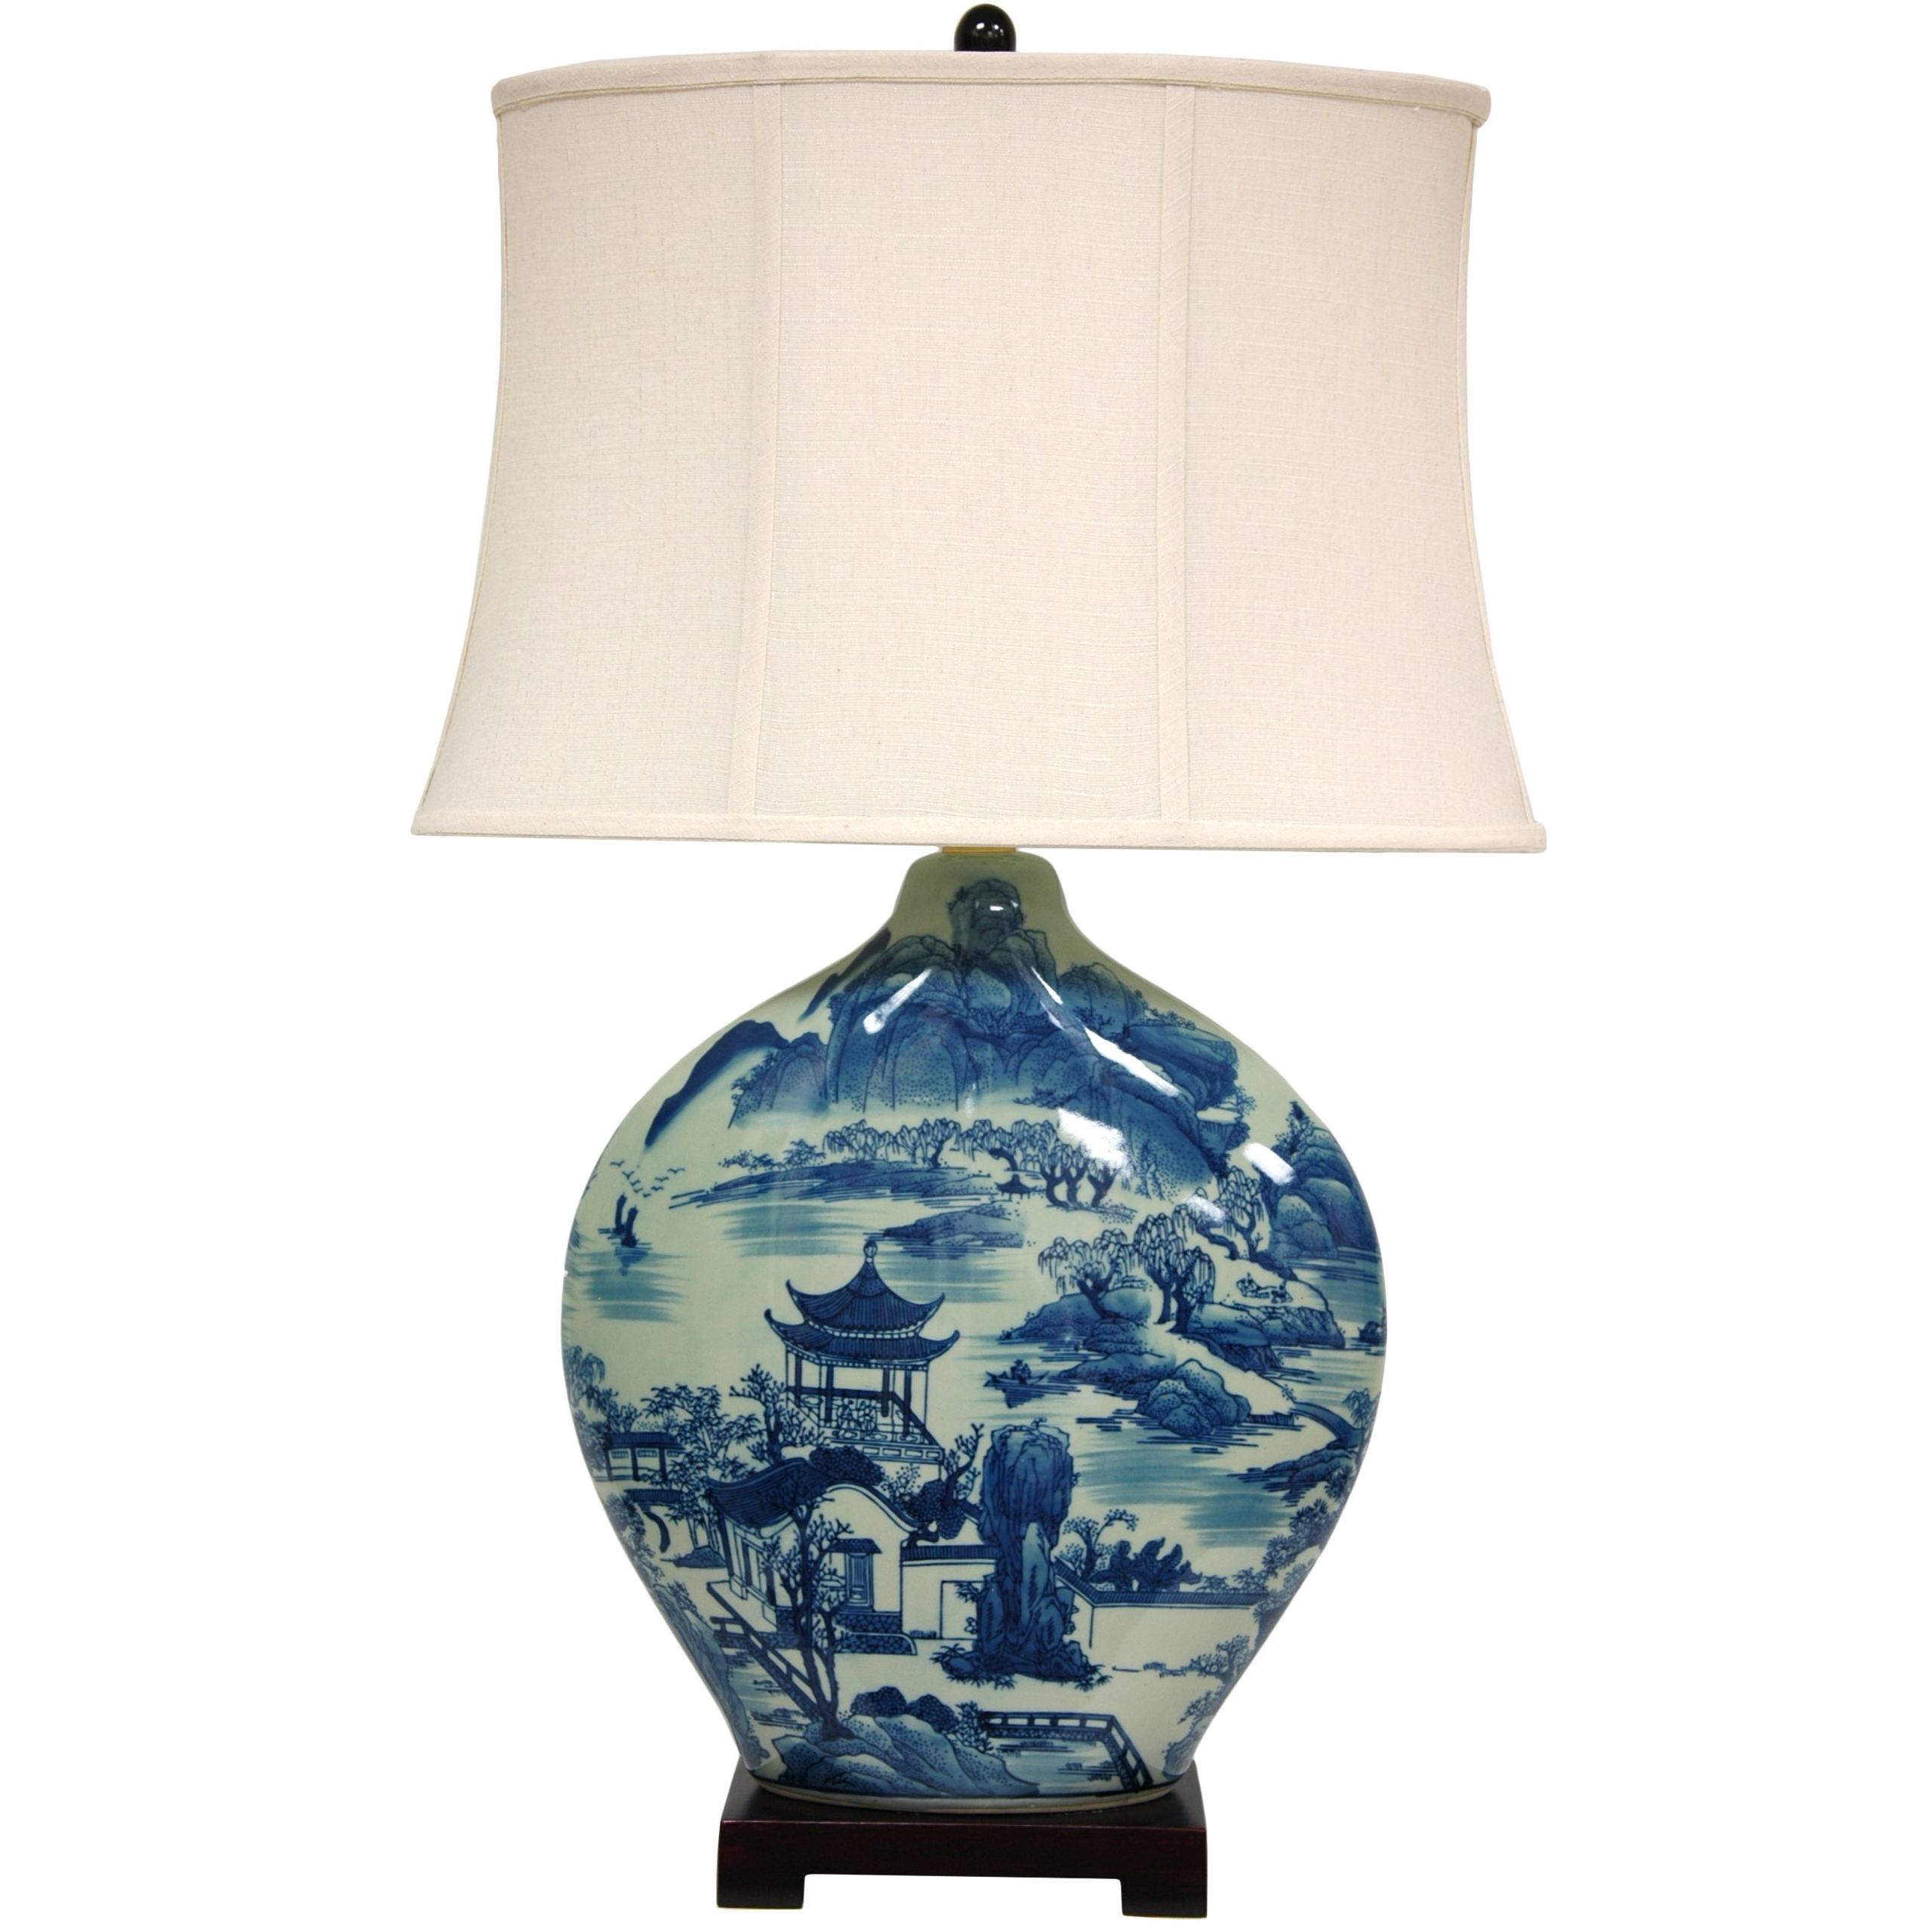 Chic chinoiserie zhang table lamp